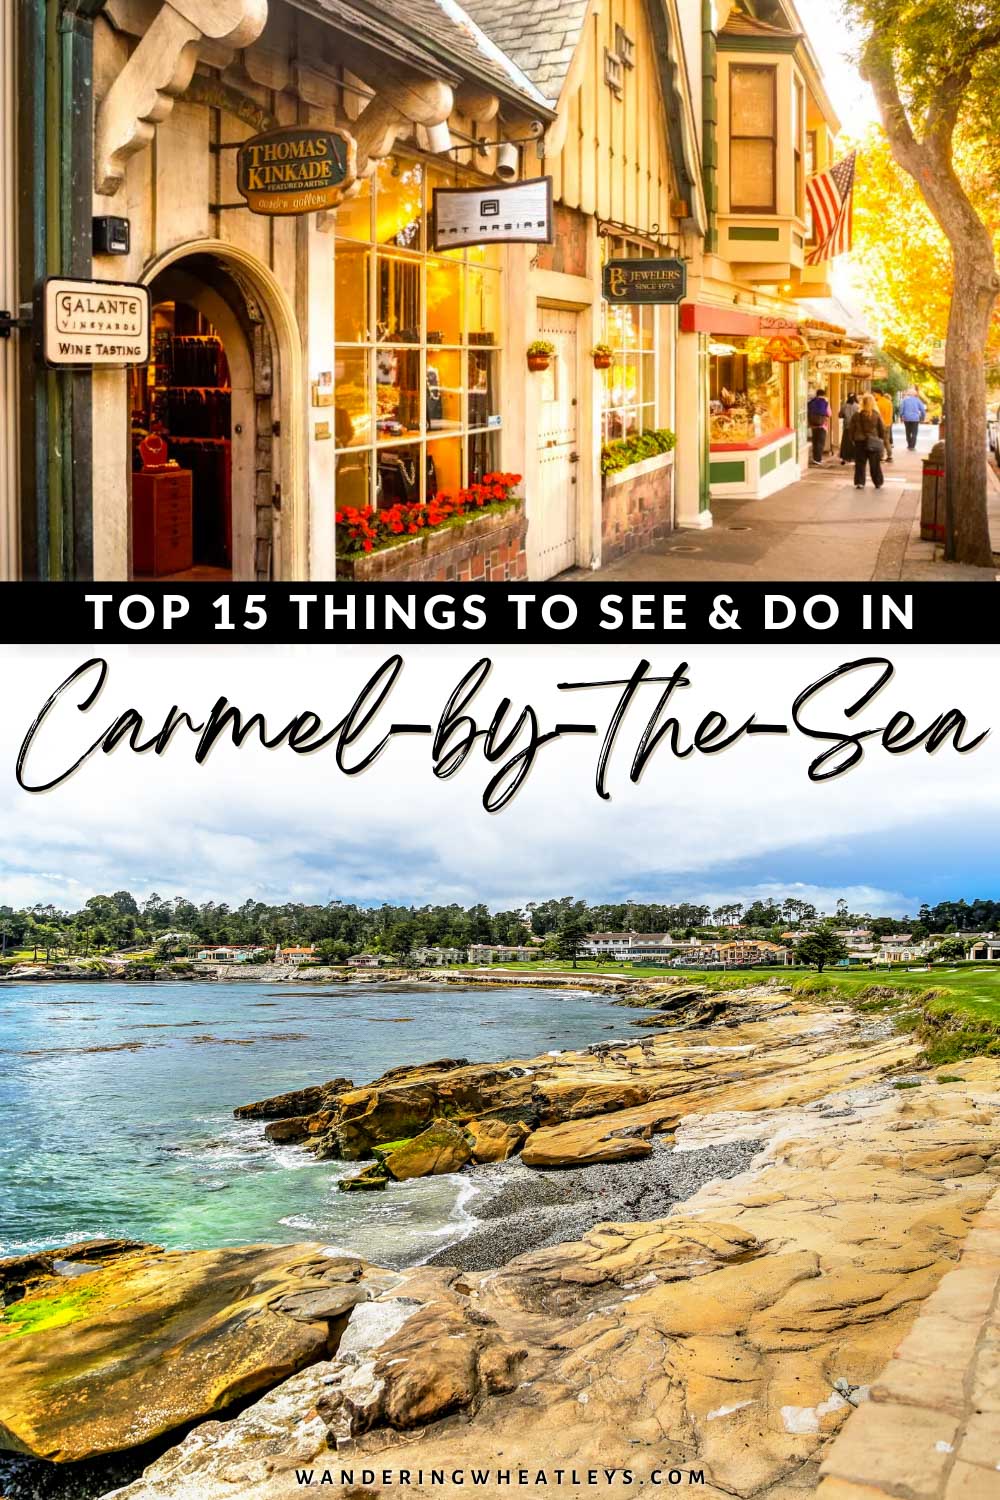 Best Things to do in Carmel-by-the-sea